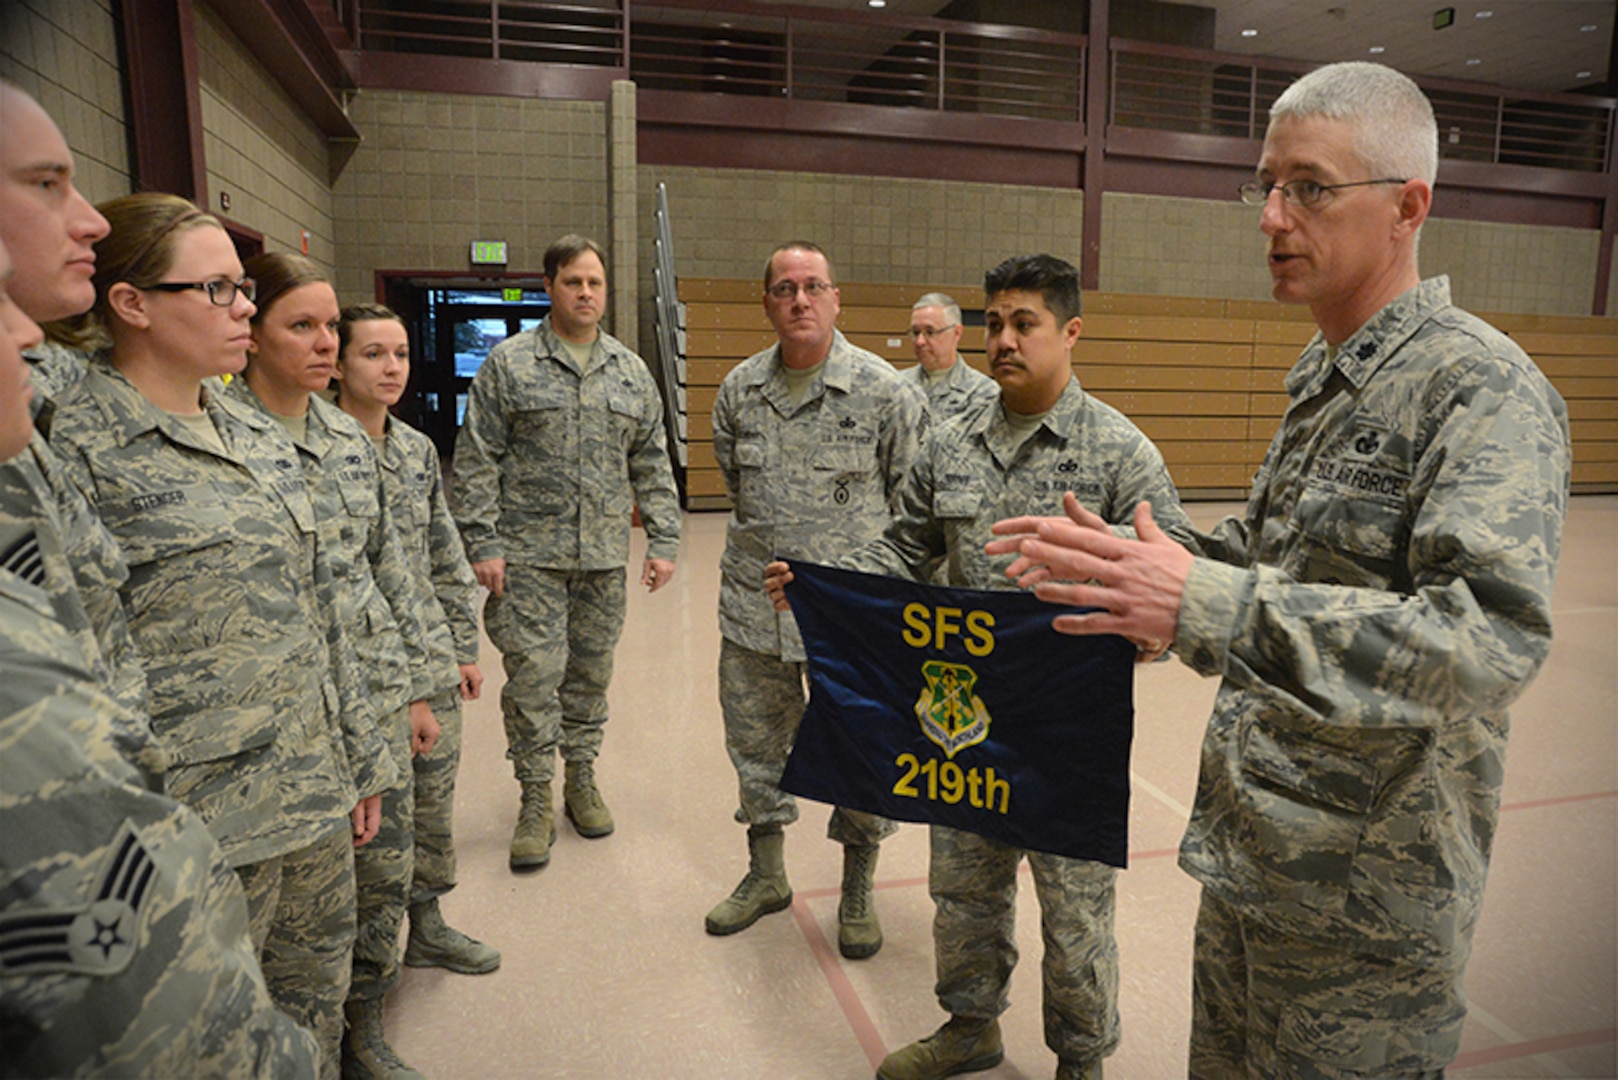 Lt. Col. Tad Shauer, the 219th Security Forces Commander, right,speaks to deploying unit members as Master Sgt. Larry Torres, the 219th Security Forces first sergeant, prepares to present a unit flag during a send-off ceremony at the Minot Armed Forces Reserve Center, Minot N.D., March 14, 2014.